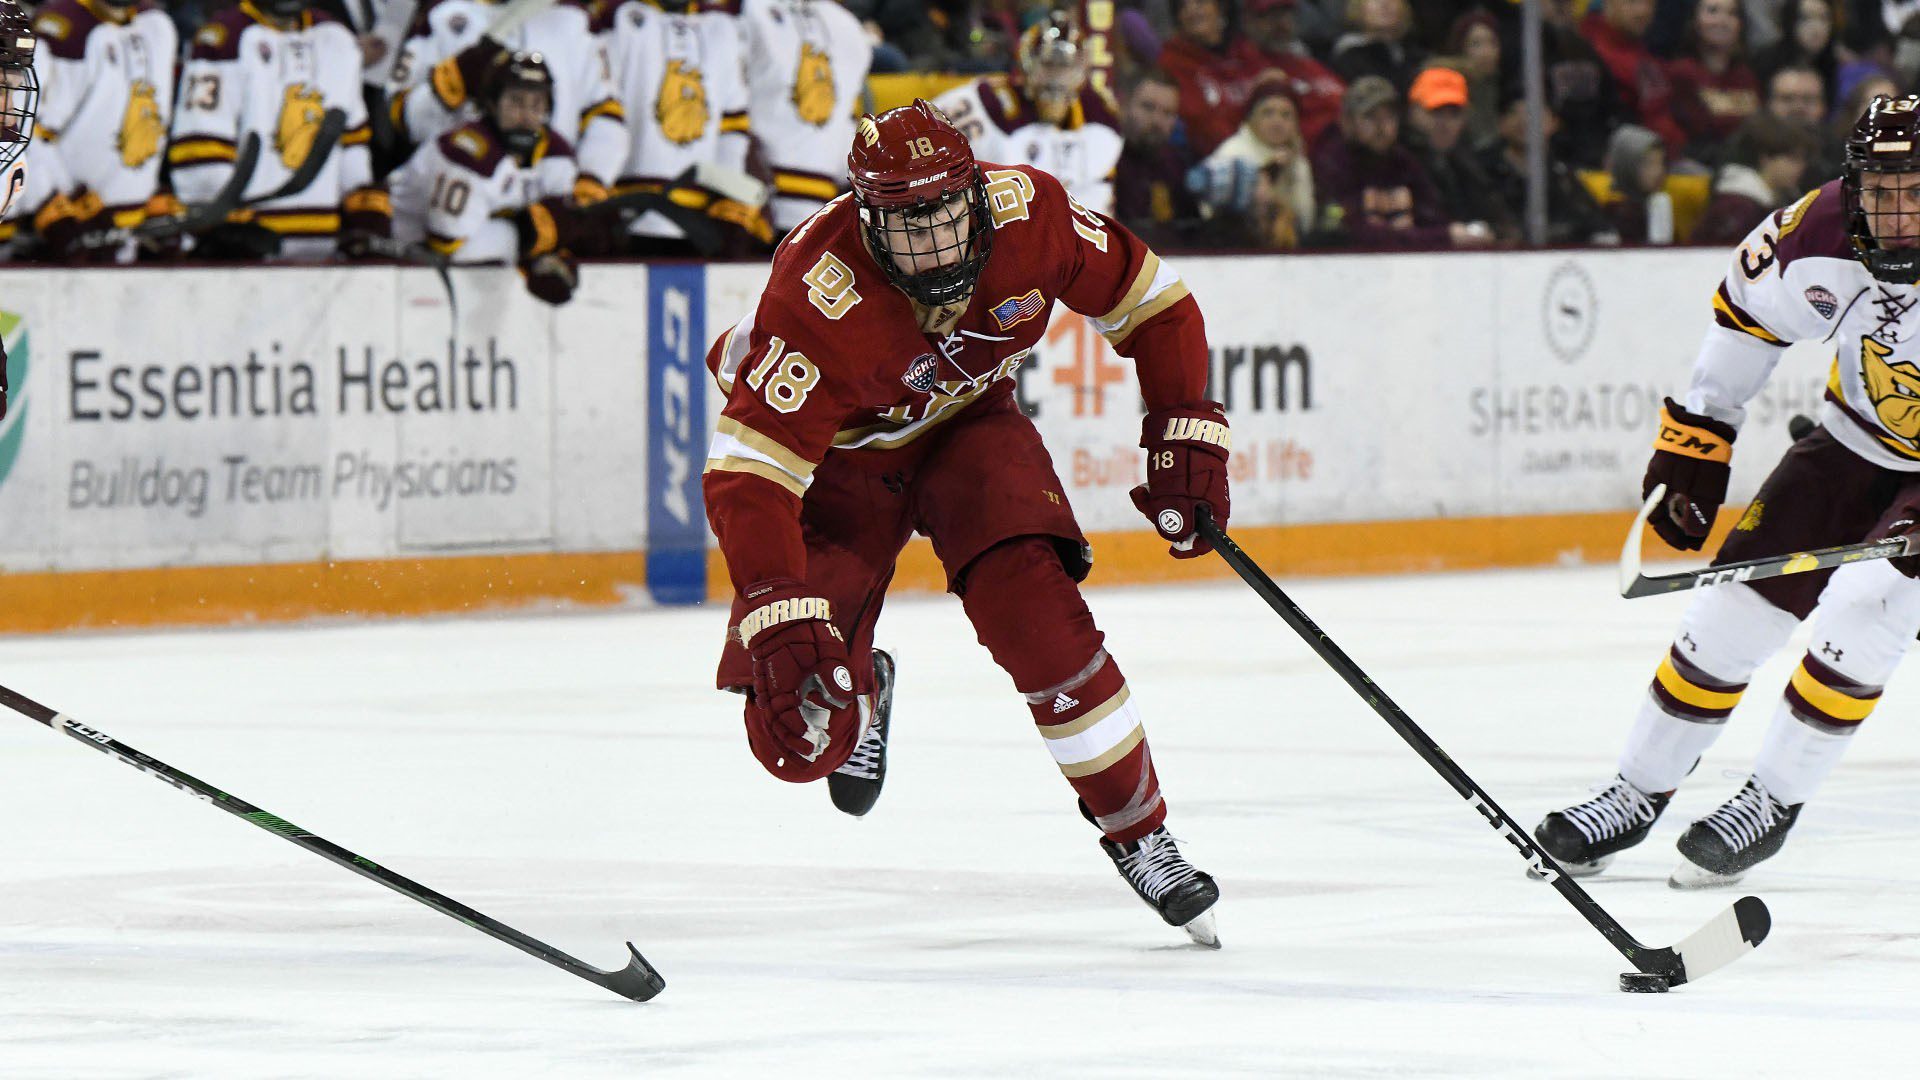 Ryan Barrow joins the Manchester Storm's 2022-23 roster after winning the NCAA with the University of Denver last term (Image: Denver Pioneers)